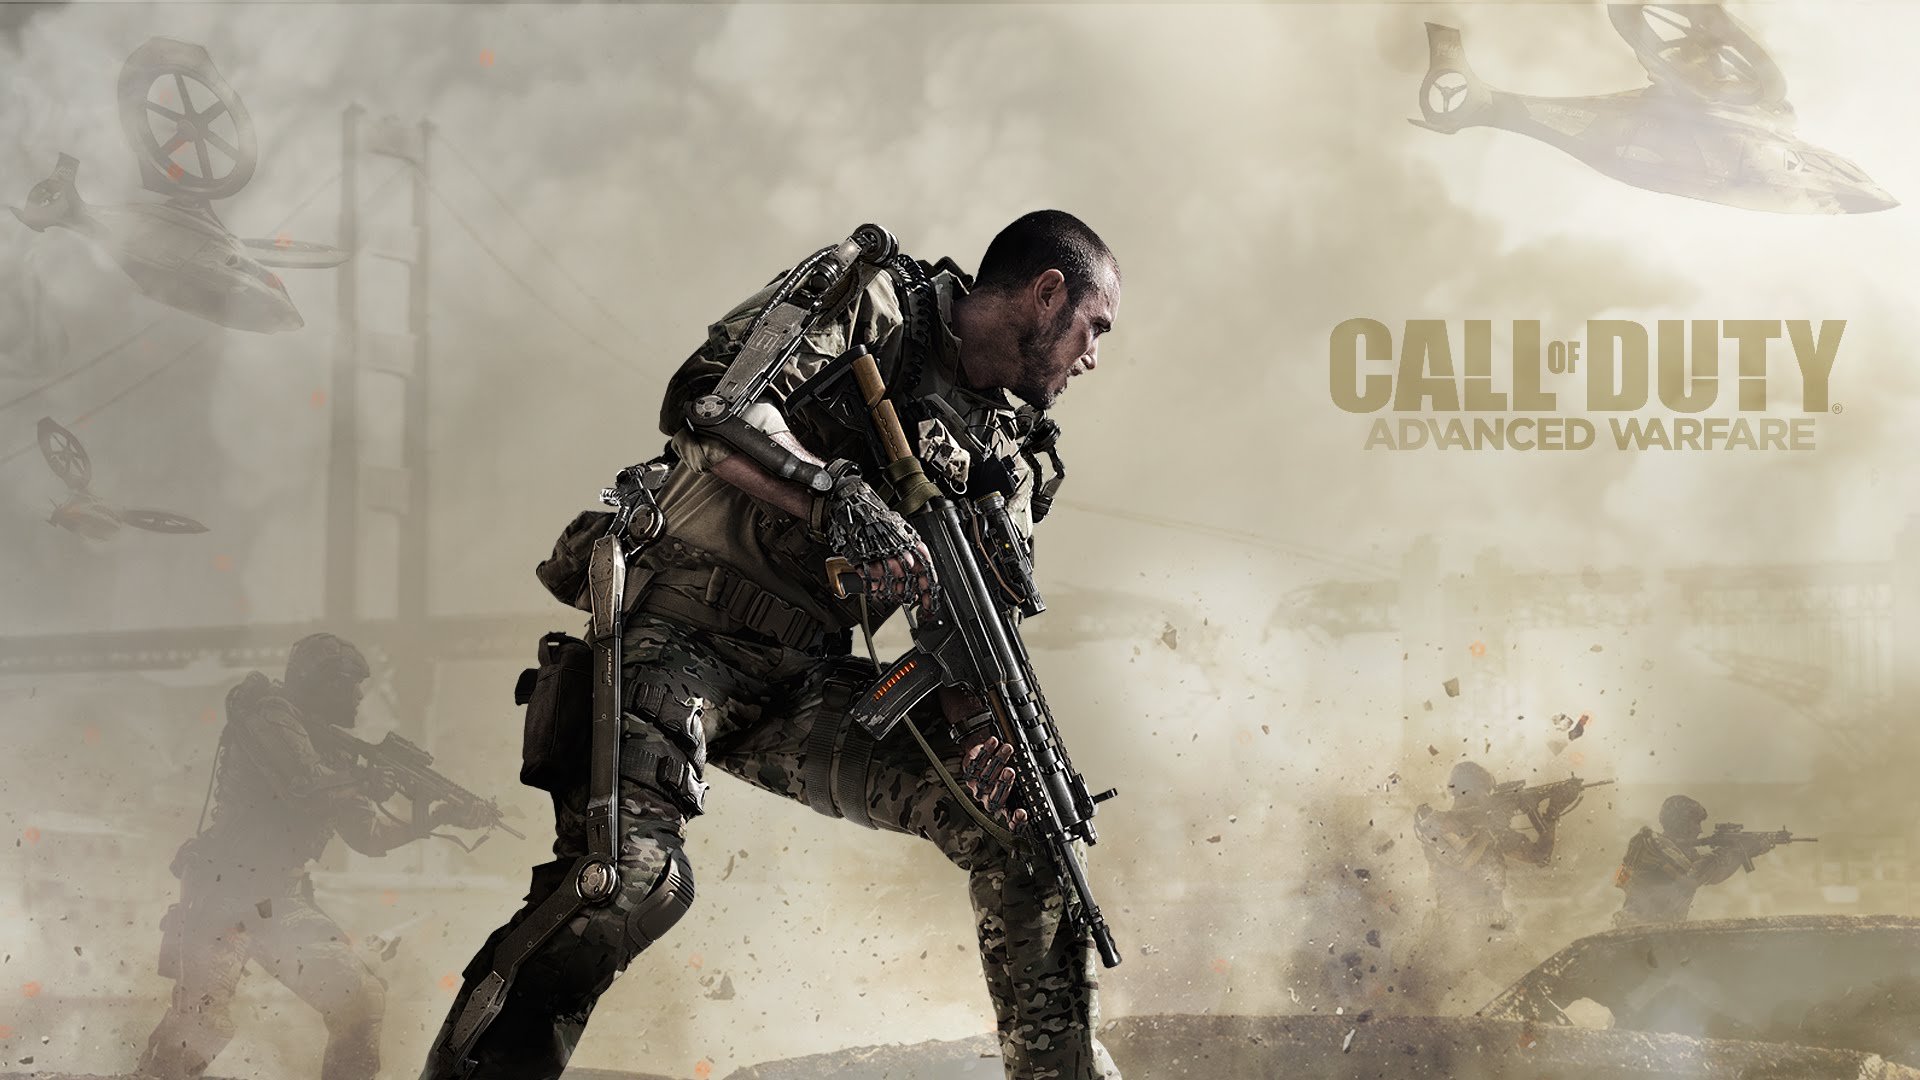 call, Of, Duty, Advanced, Warfare, Tactical, Shooter, Stealth, Action, Military, Fighting, Cod, Sci fi, Warrior, Weapon, Gun, Poster Wallpaper